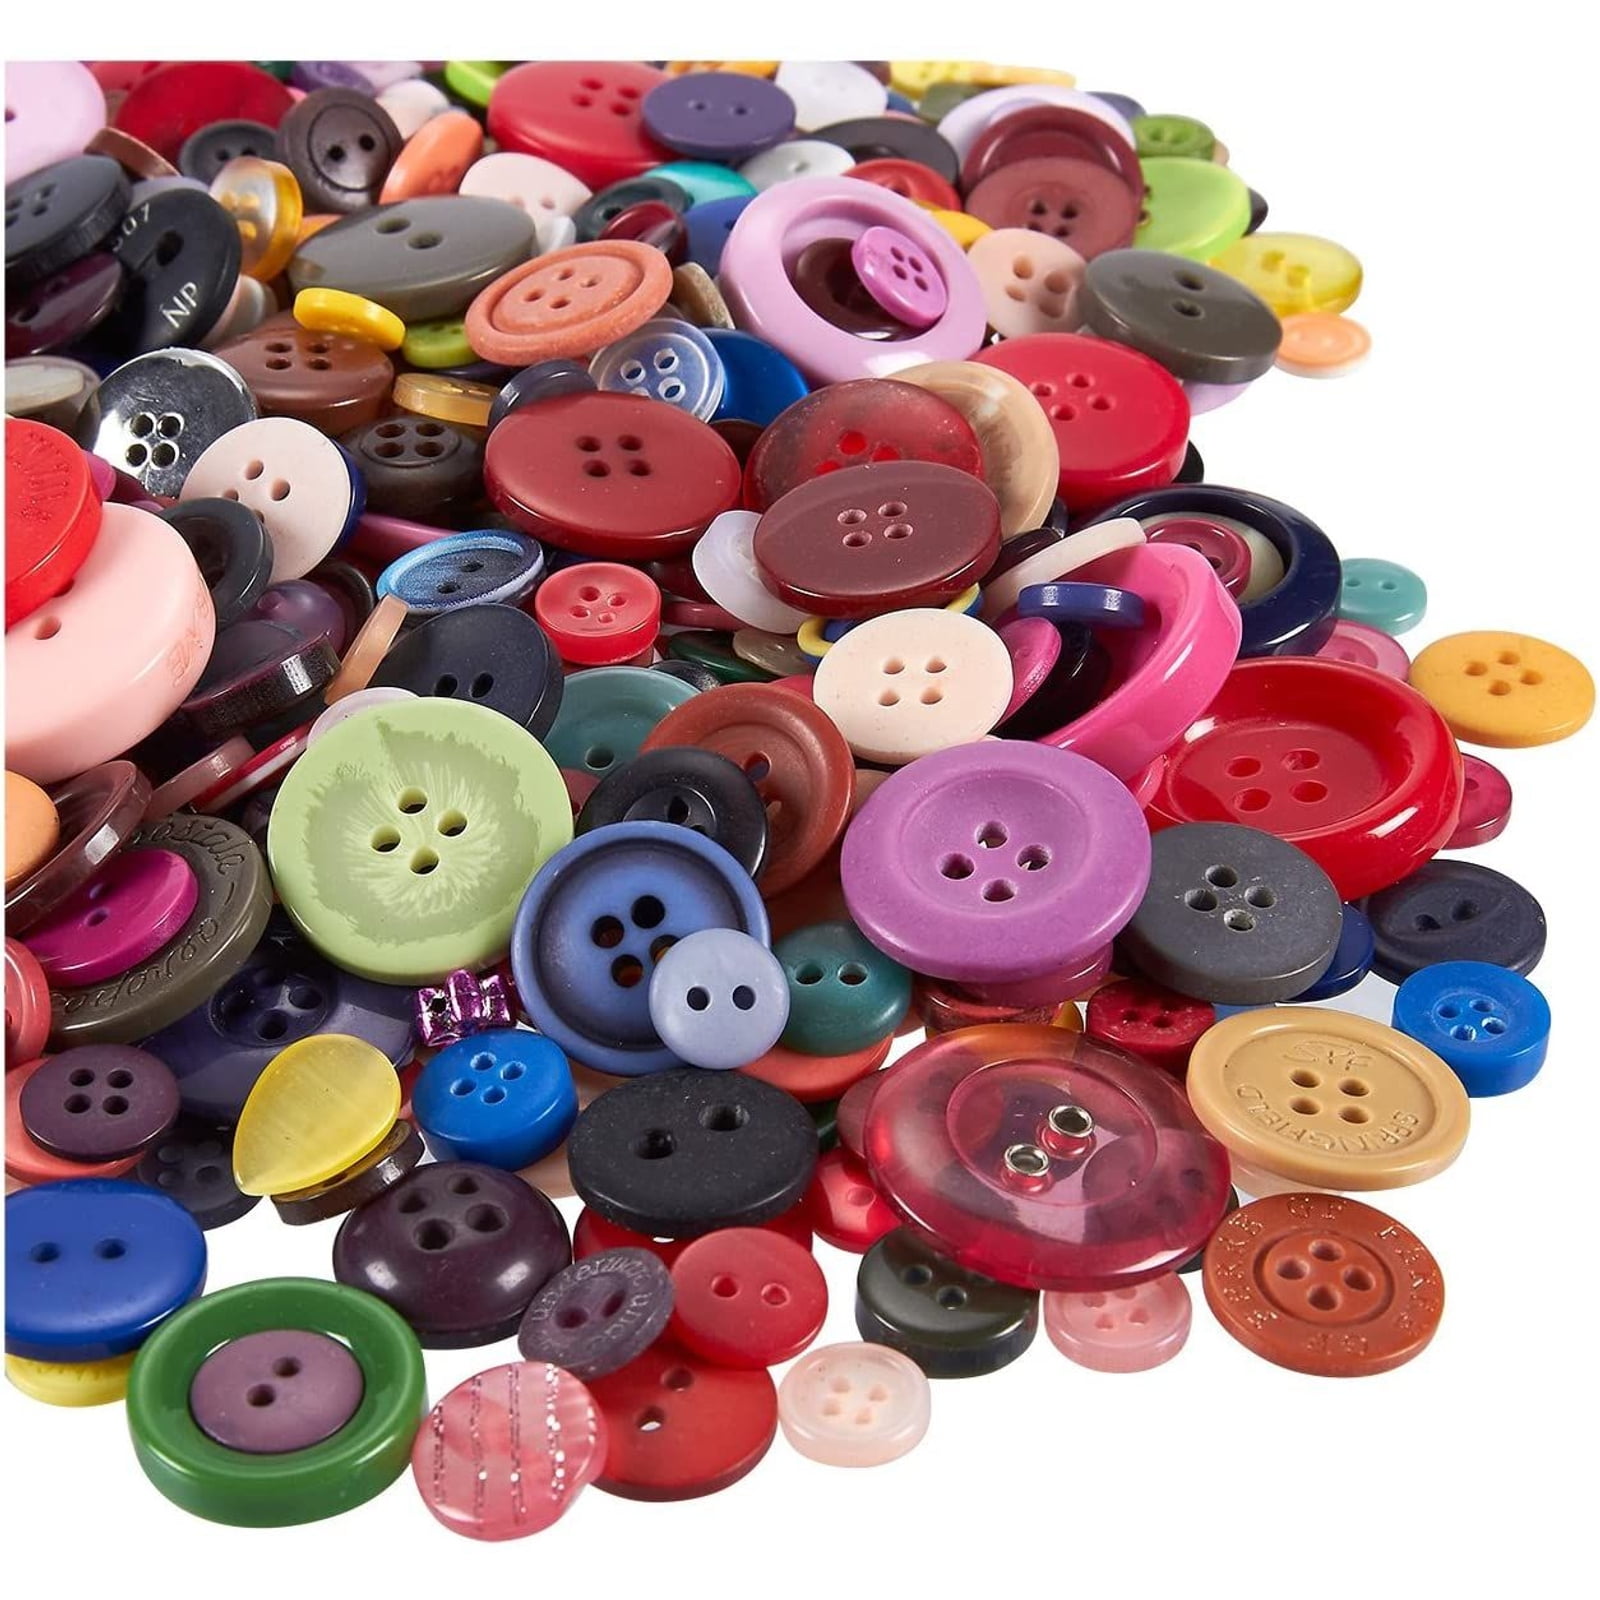 200 Assorted Colorful Buttons Multi Colors Mixed Sizes Craft Supply Variety